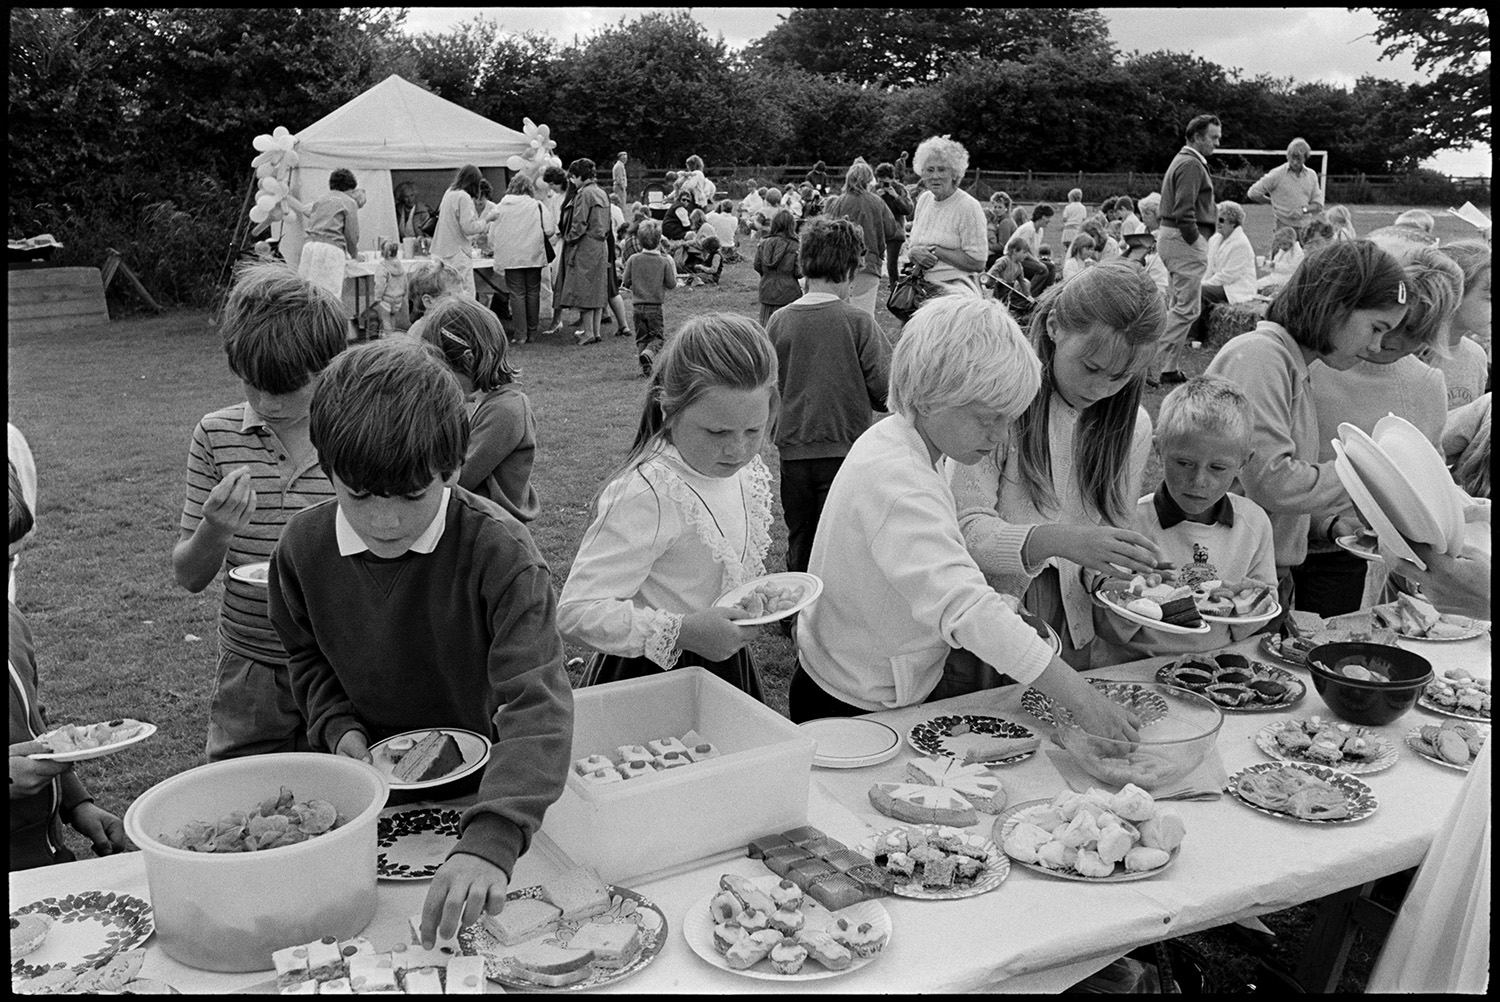 School sports day, races ,people having tea and cakes from trestle tables. 
[Children helping themselves to cakes and crisps laid out on trestle tables at Dolton School sports day. Other people can be seen in the background on the sports field and at a refreshment tent with balloons.]